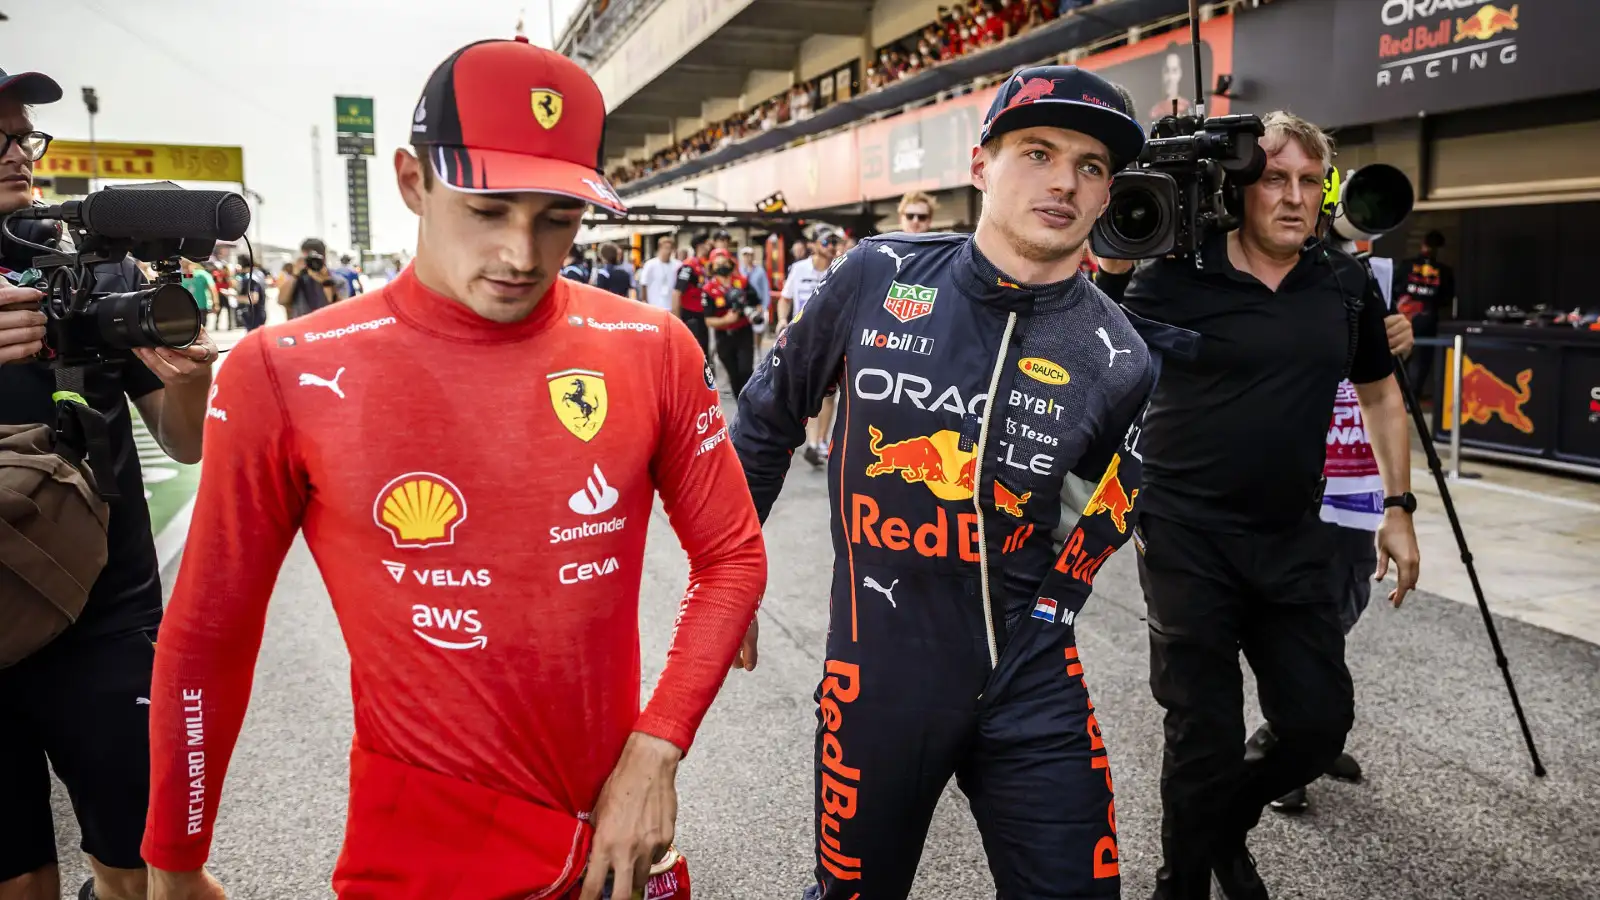 Red Bull driver Max Verstappen and Ferrari driver Charles Leclerc walking together in the Barcelona pitlane. Barcelona, May 2022.